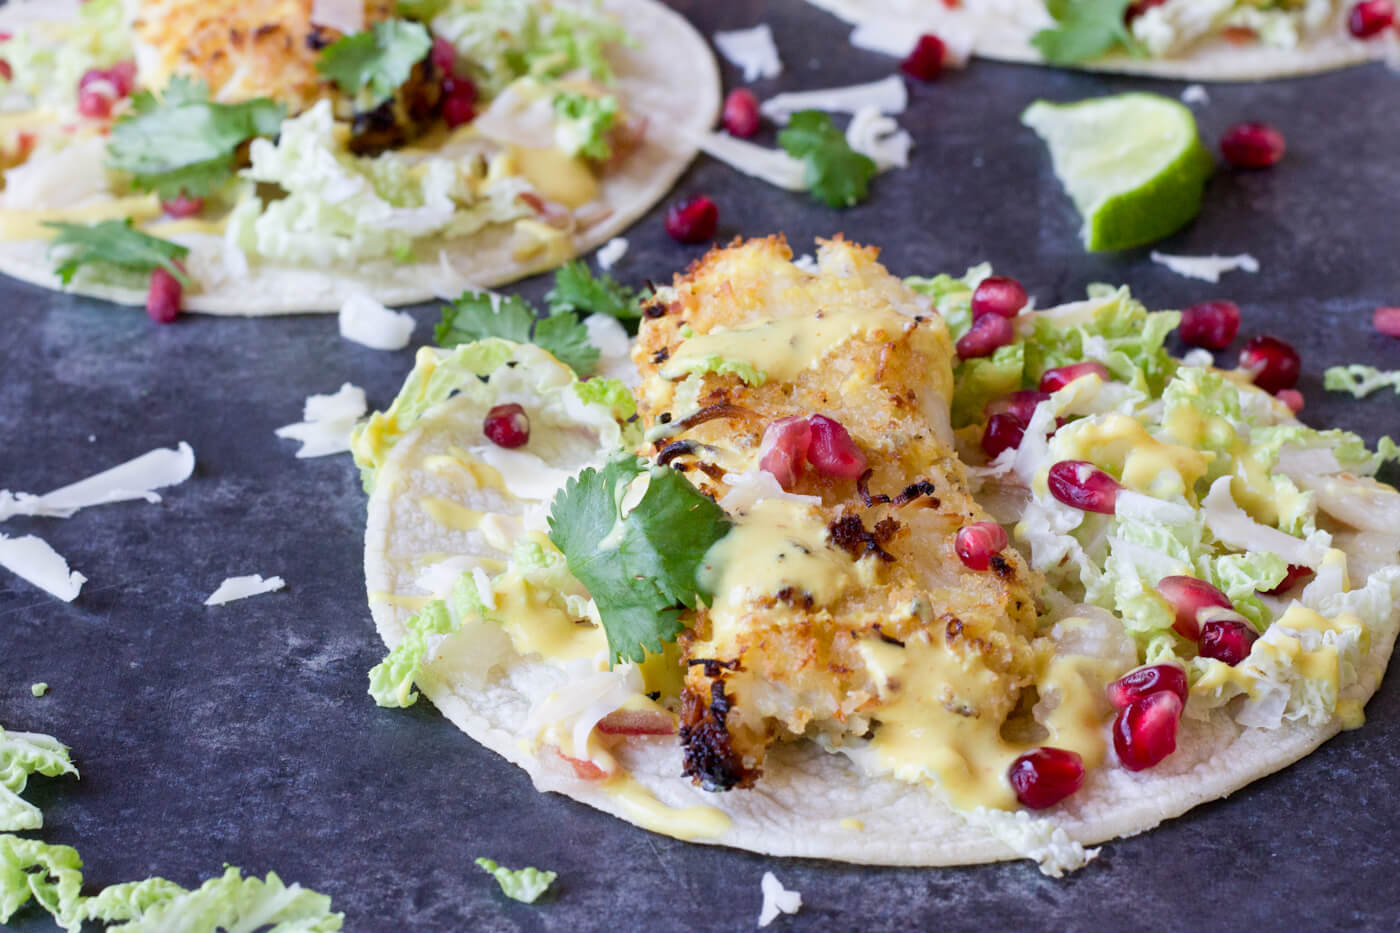 Crazy for tacos? Add these Crispy Fish Tacos to your menu! Crispy baked cod topped with pomegranates, shredded pear, and Honey Lime Crema. Simple to make at home!